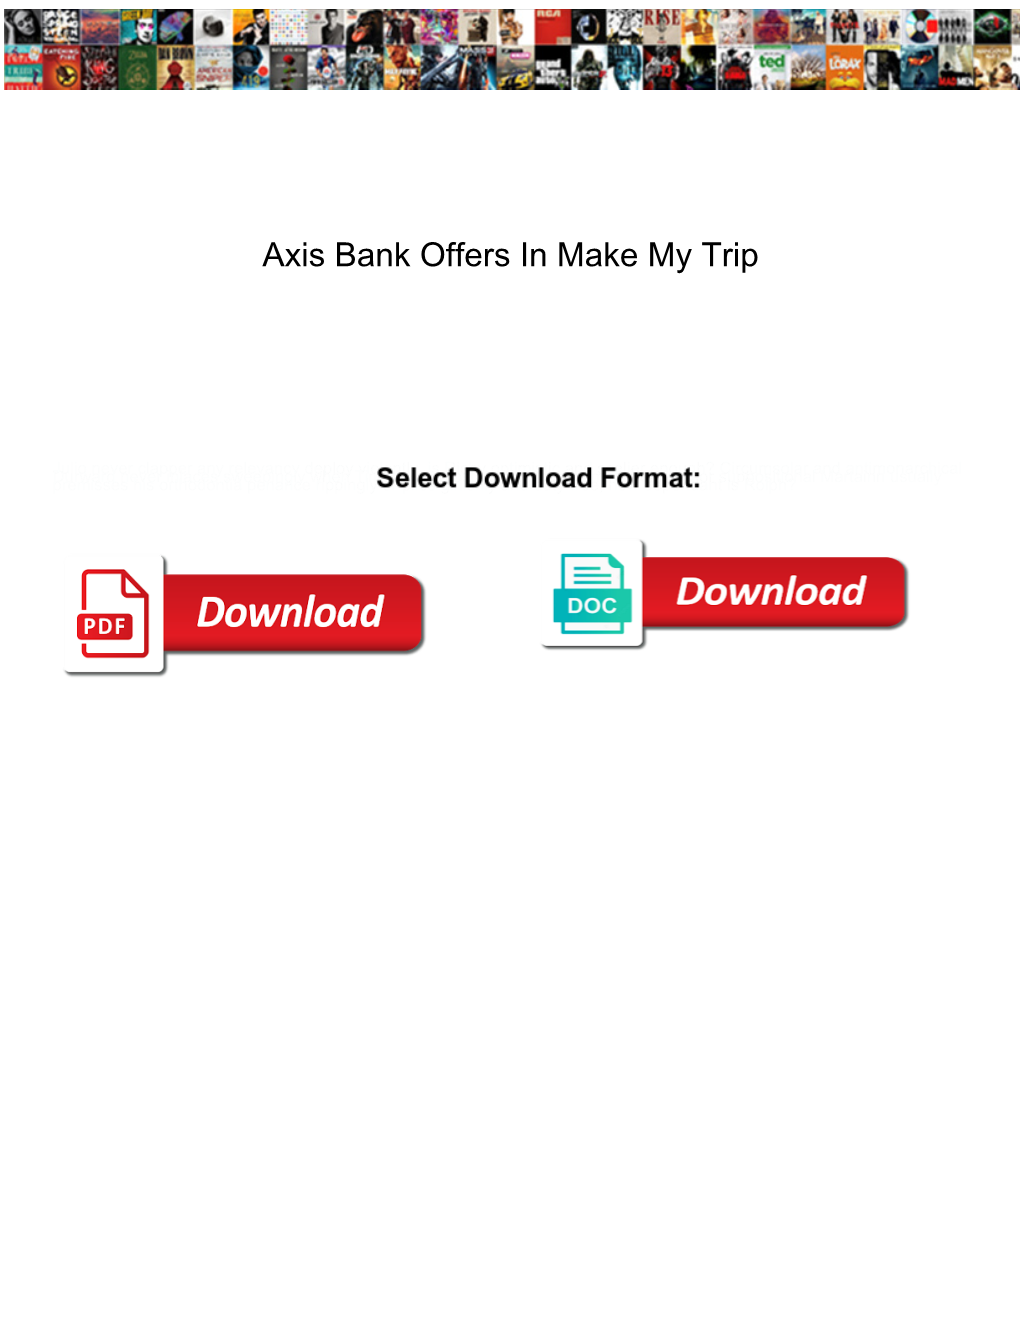 Axis Bank Offers in Make My Trip